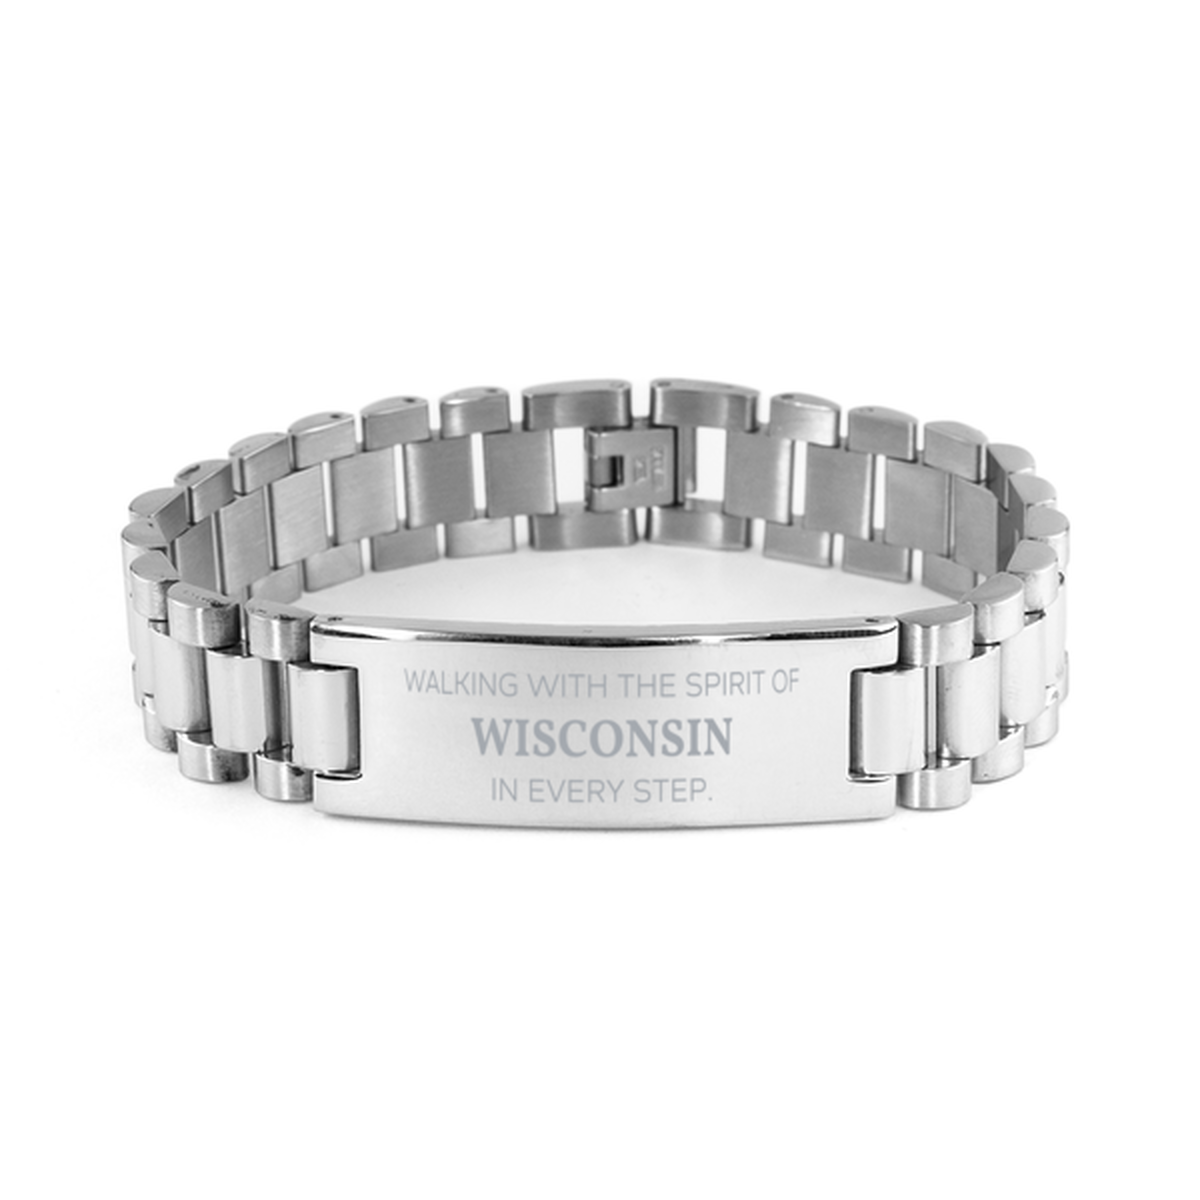 Wisconsin Gifts, Walking with the spirit, Love Wisconsin Birthday Christmas Ladder Stainless Steel Bracelet For Wisconsin People, Men, Women, Friends